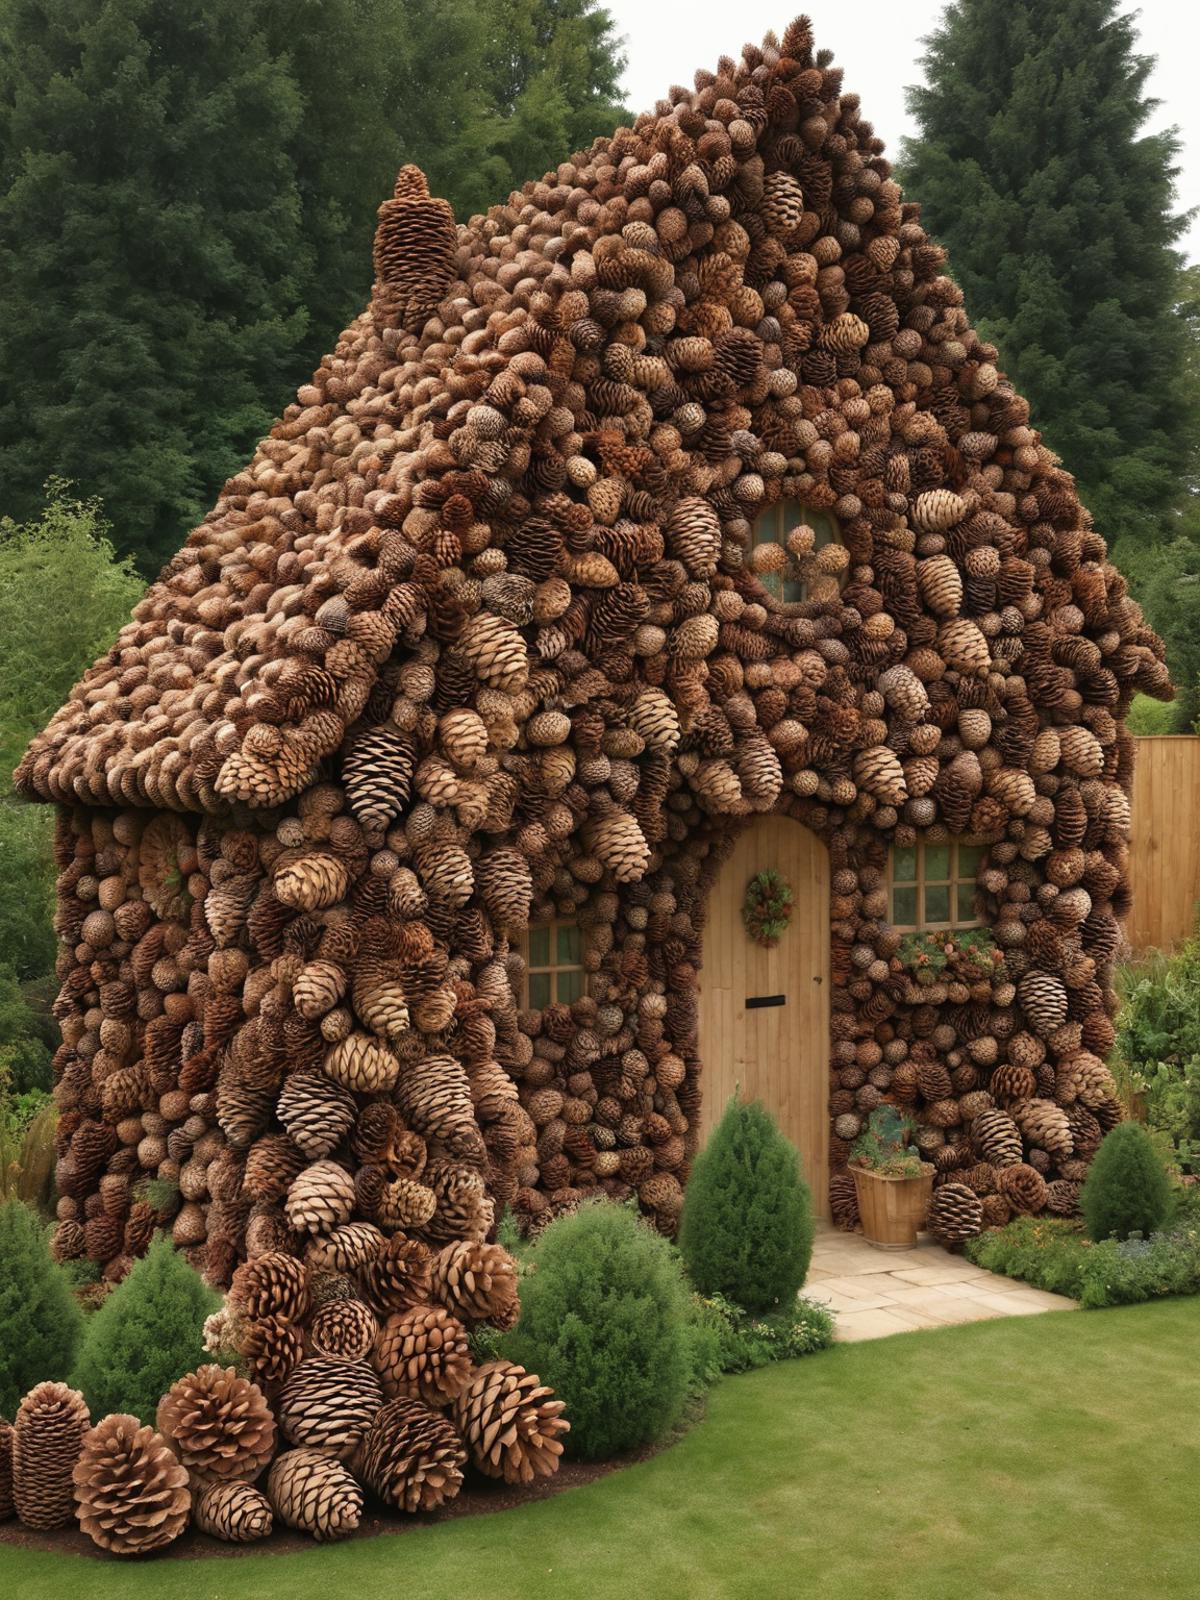 A house covered in pinecones with a garden in the yard.